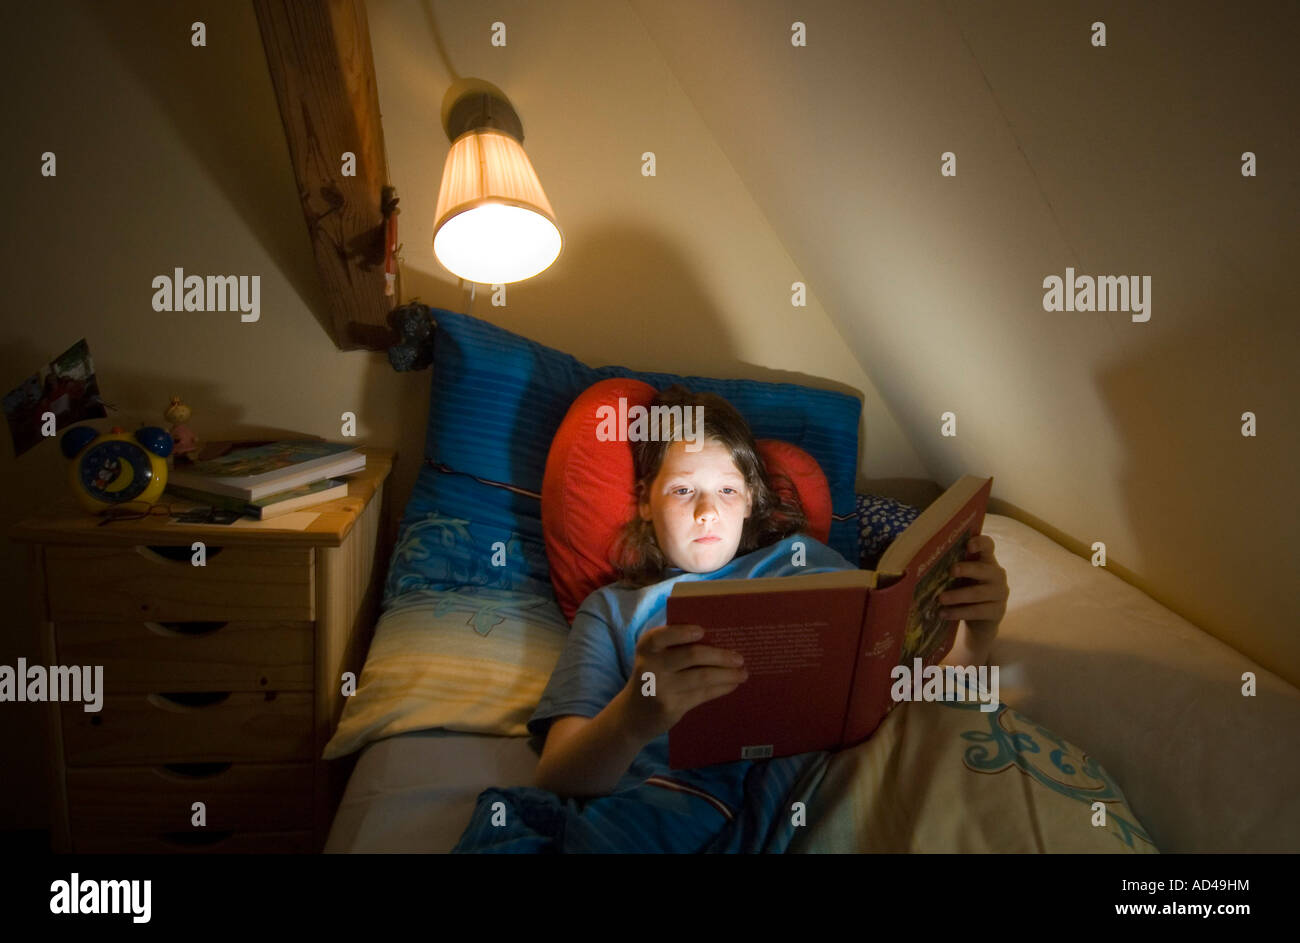 Girl reads in her bed Stock Photo